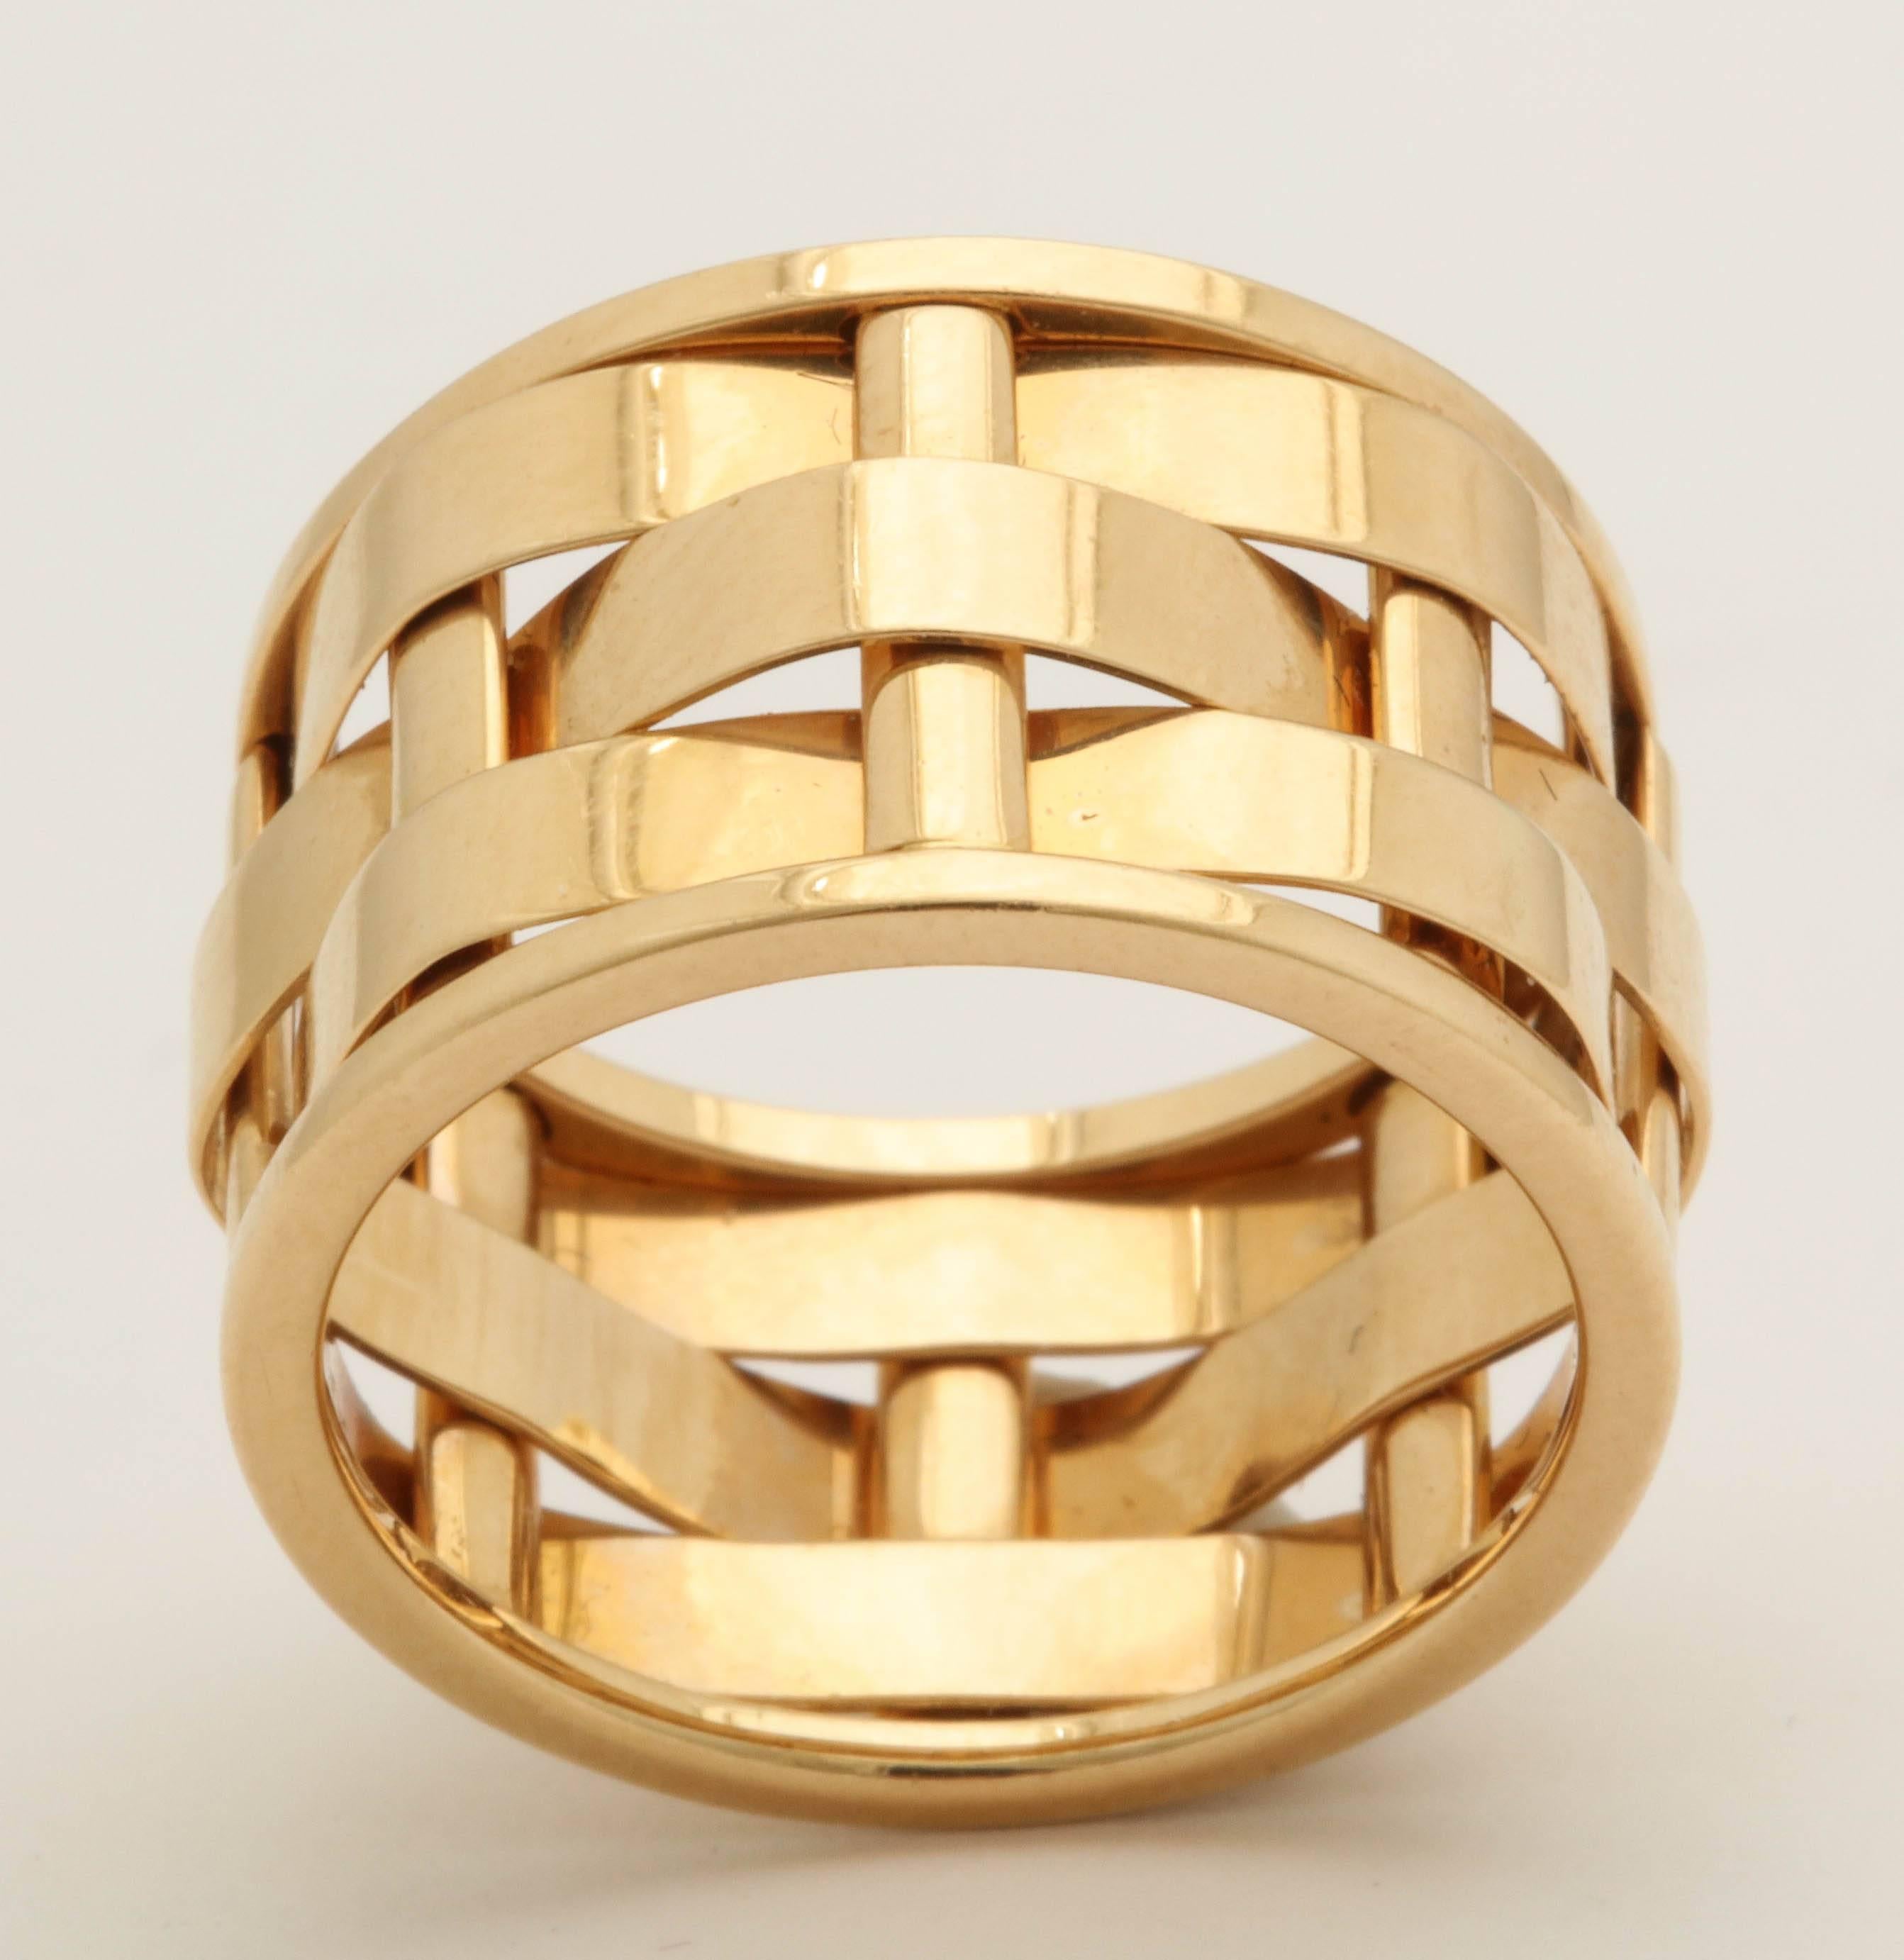 One 18kt Gold Band Ring Exhibiting An Open Link Basket Weave Design ,Created By Ralph Lauren. Original List Retail Price Was 3500.00 Note: With Original price tag still on the ring.Very Chic And Classic Ralph Lauren Design.Ring Size 6.